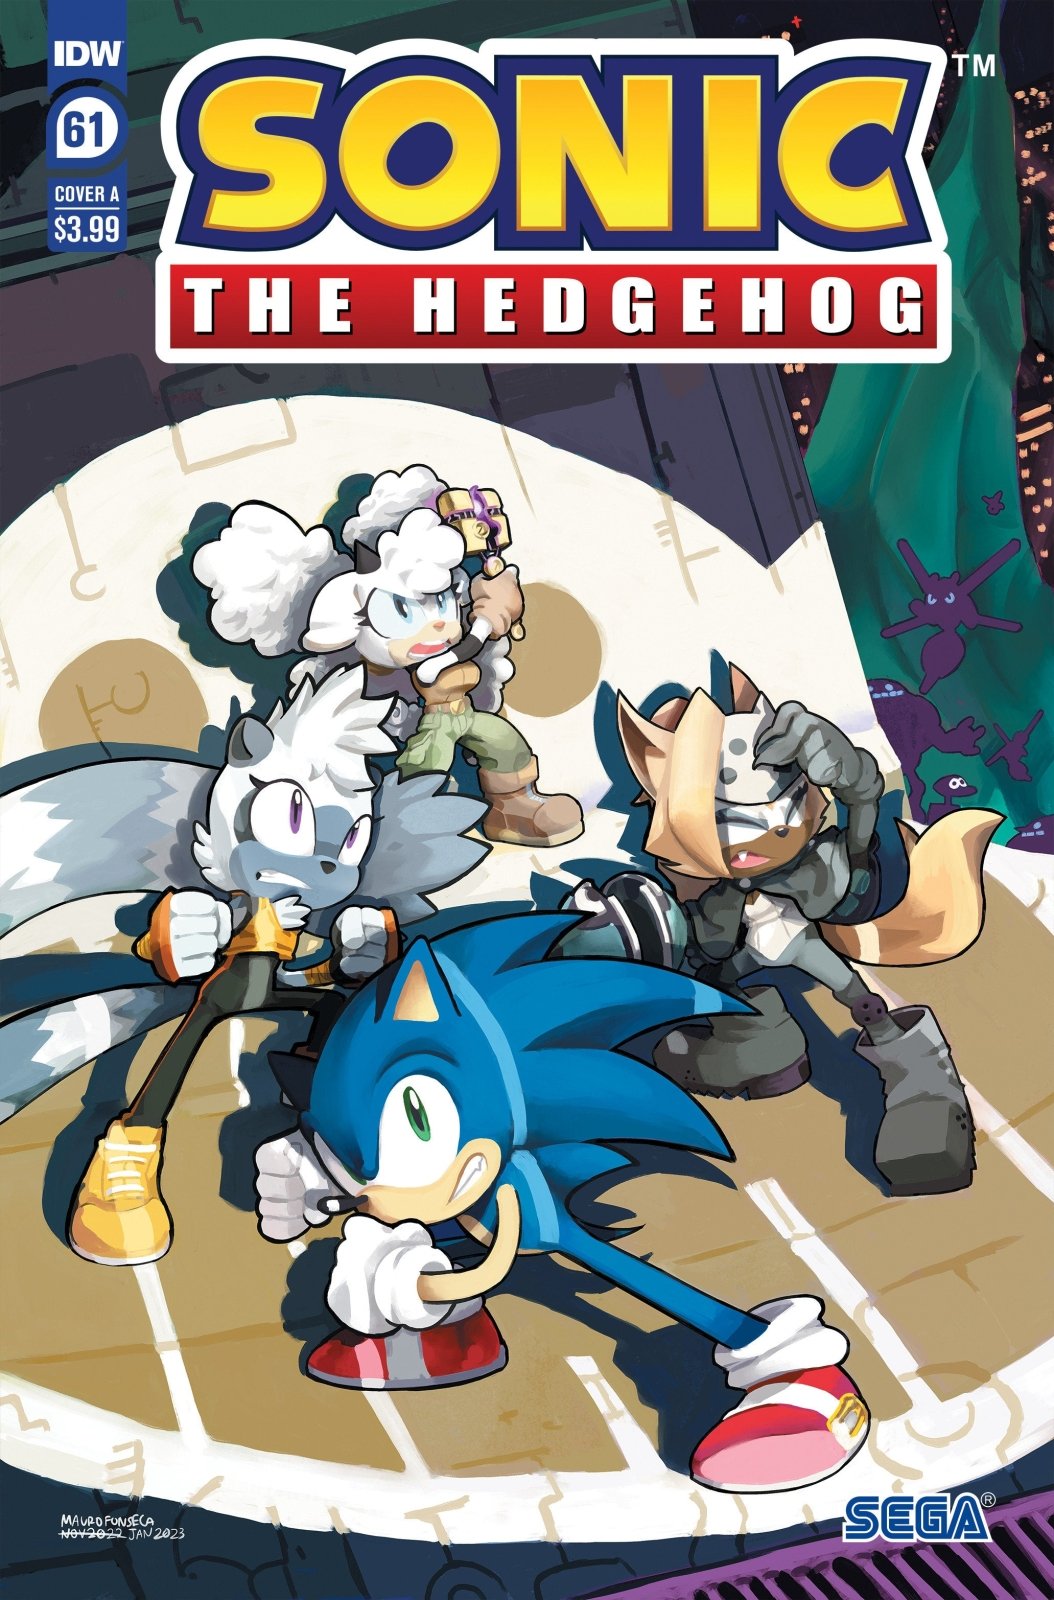 Sonic The Hedgehog #61 Cover A (Fonseca) - The Fourth Place